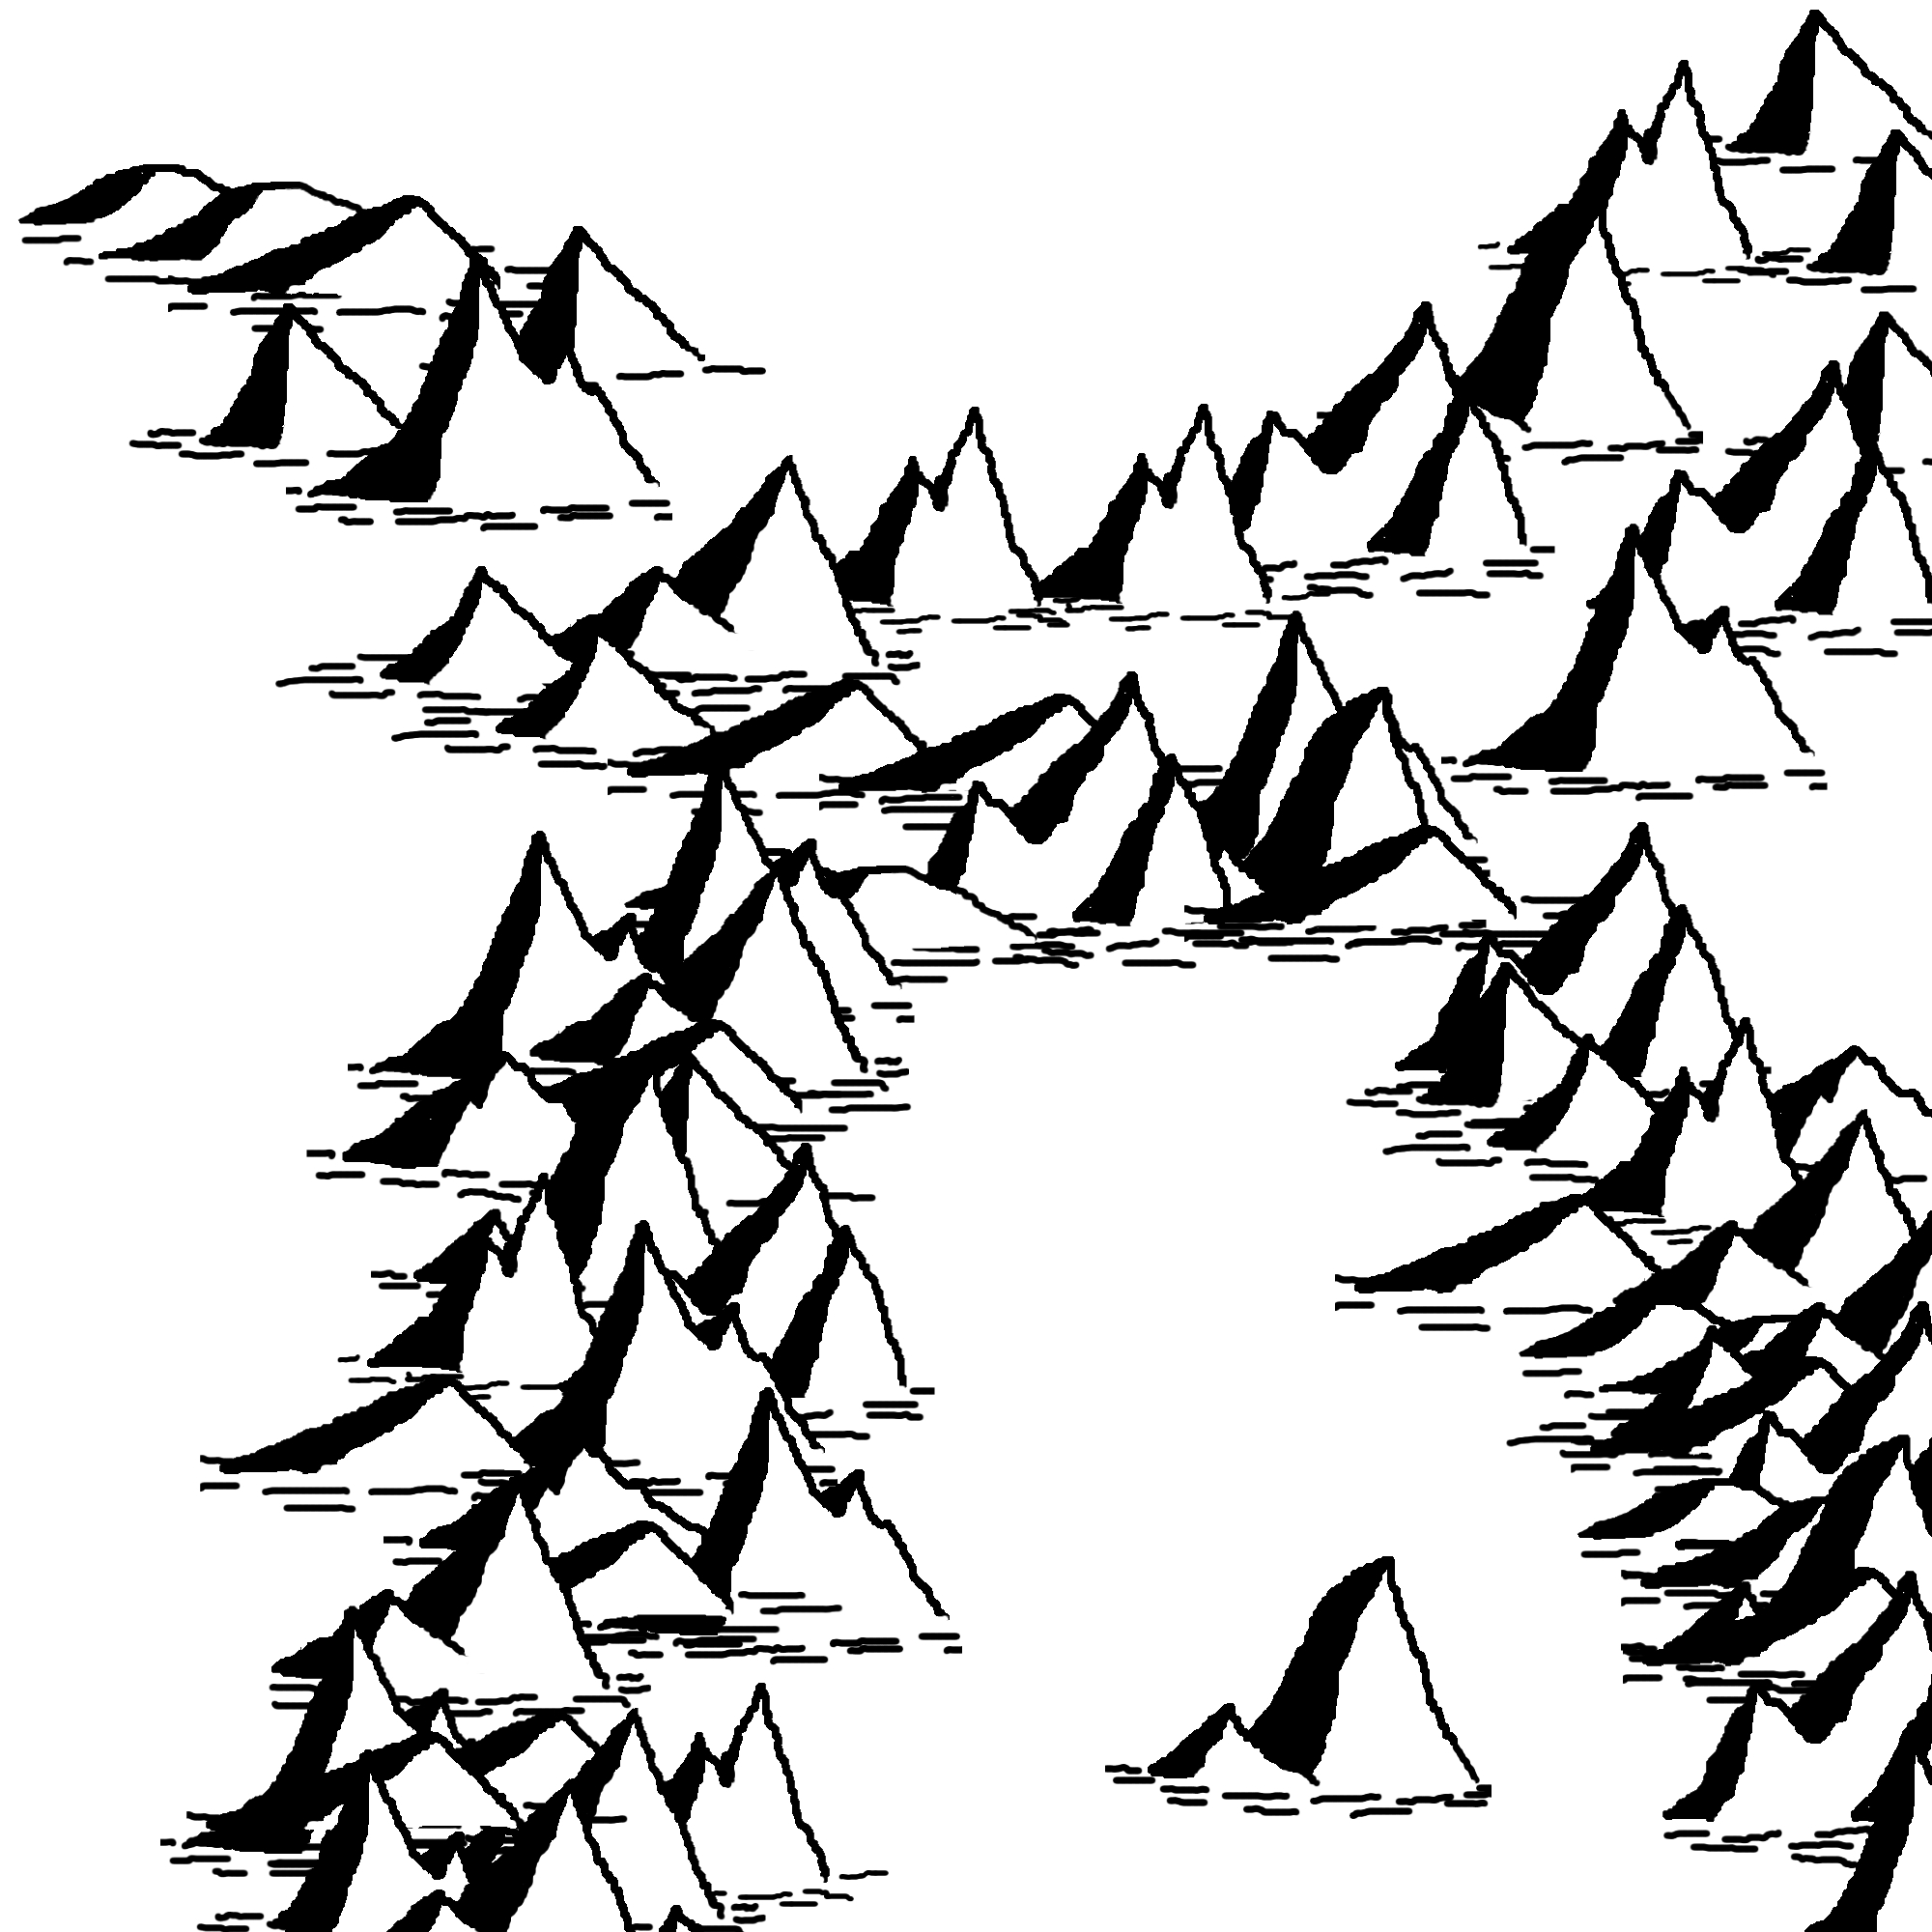 Mountain Line Drawing - Clipart library